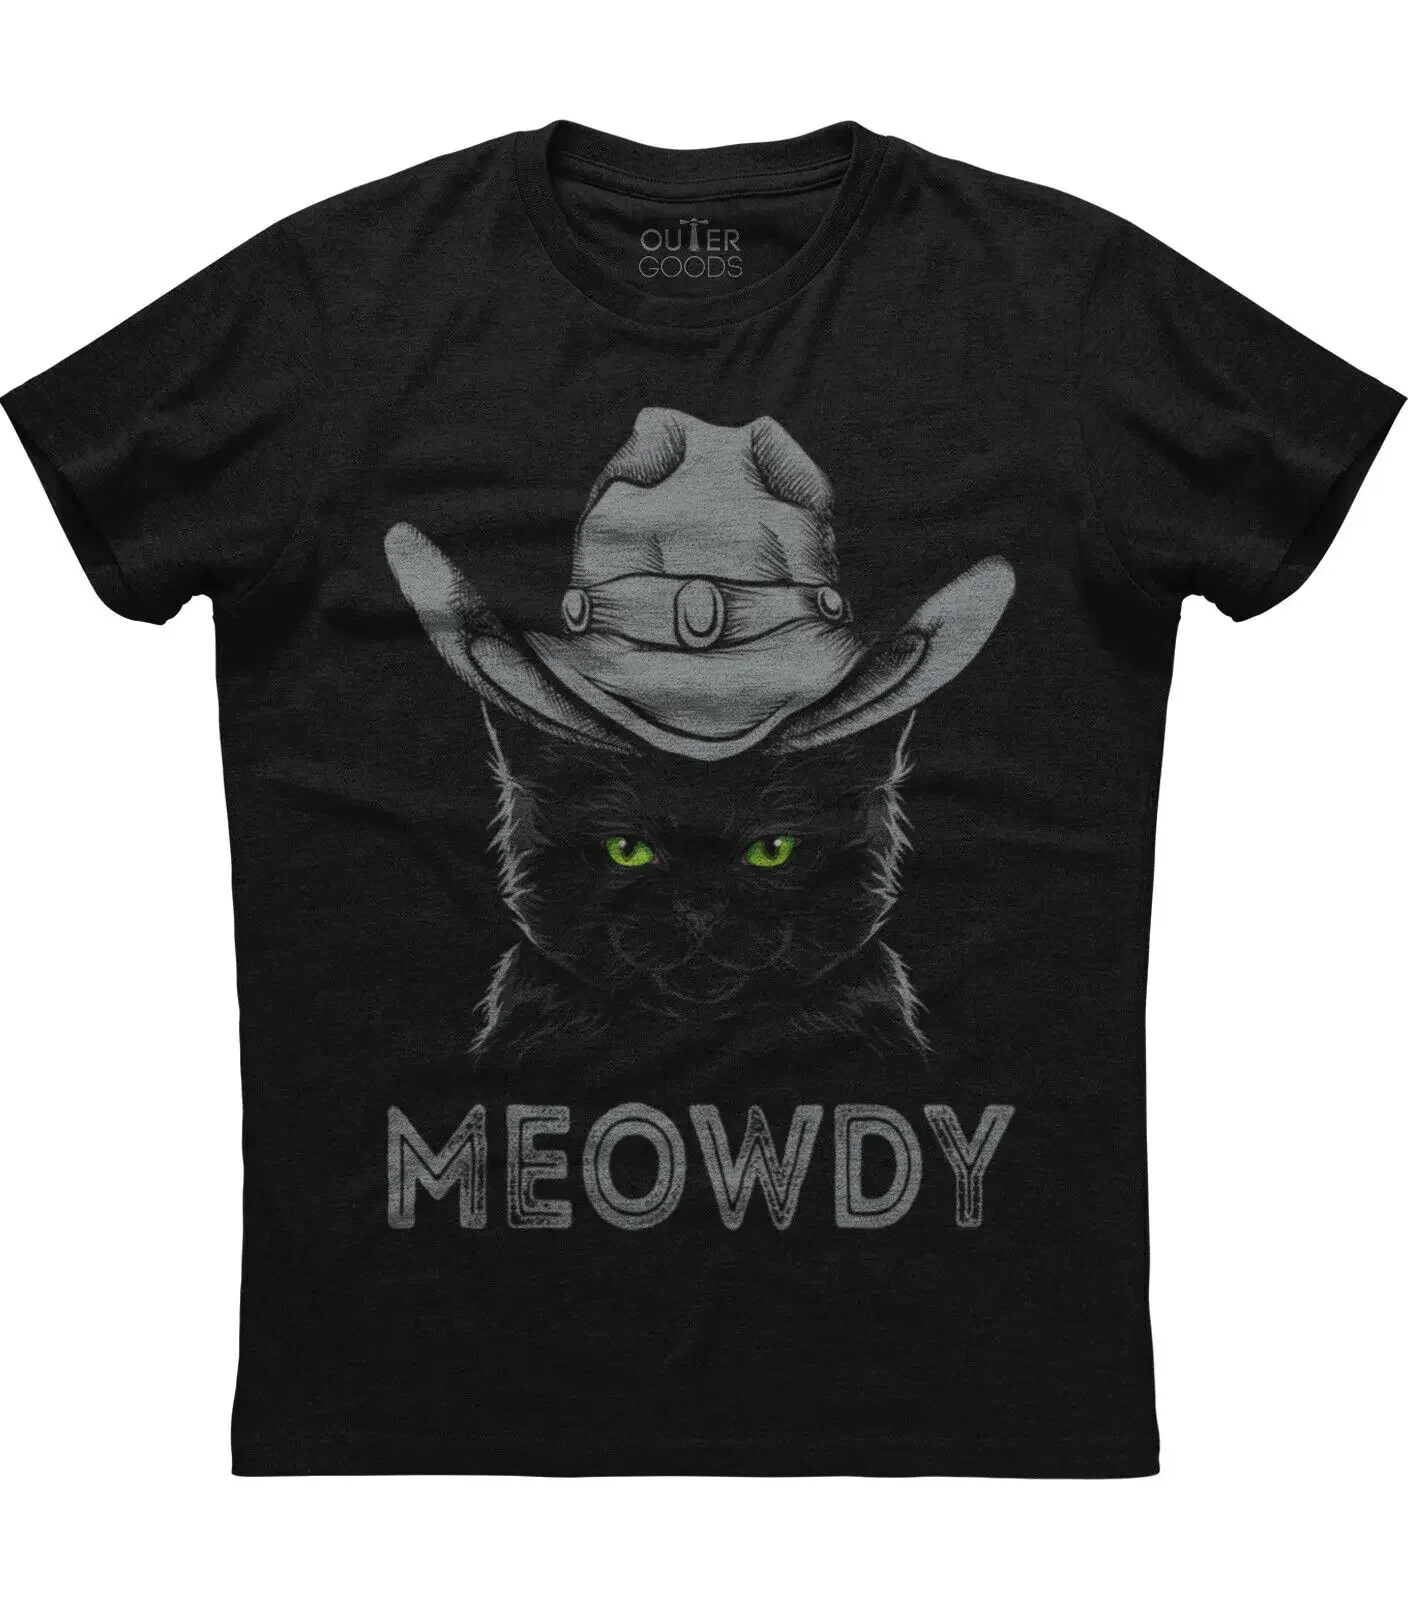 

Meowdy. Mashup Between Meow and Howdy. Funny Cat Lovers T-Shirt. Summer Cotton O-Neck Short Sleeve Mens T Shirt New S-3XL